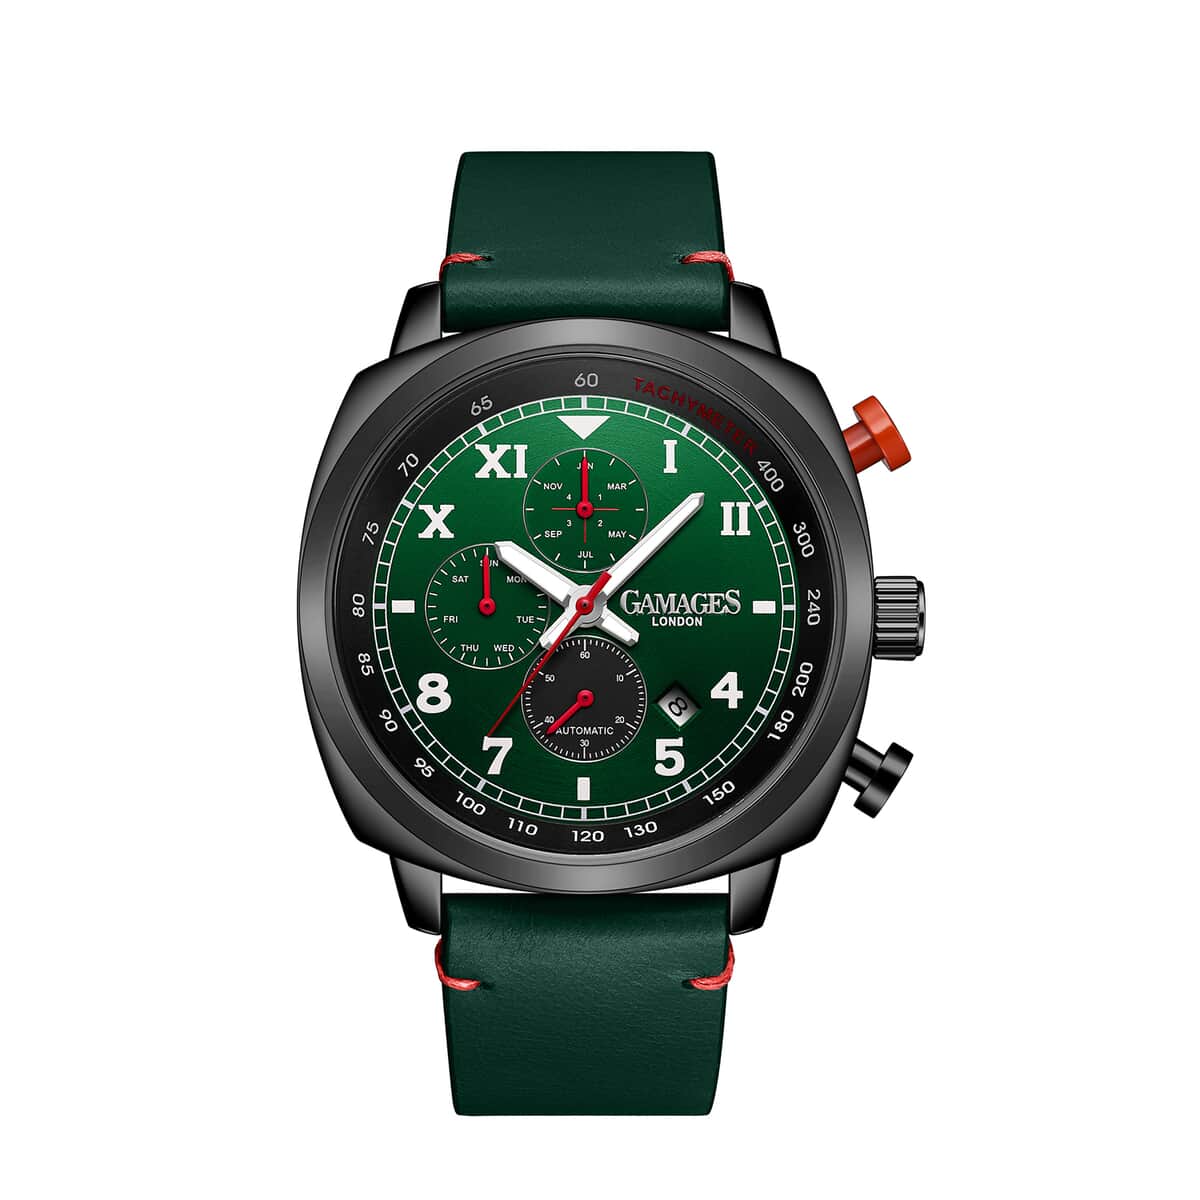 GAMAGES OF LONDON Limited Edition Hand Assembled Apex Automatic Movement Genuine Leather Strap Watch in Green (45mm) FREE GIFT PEN image number 0